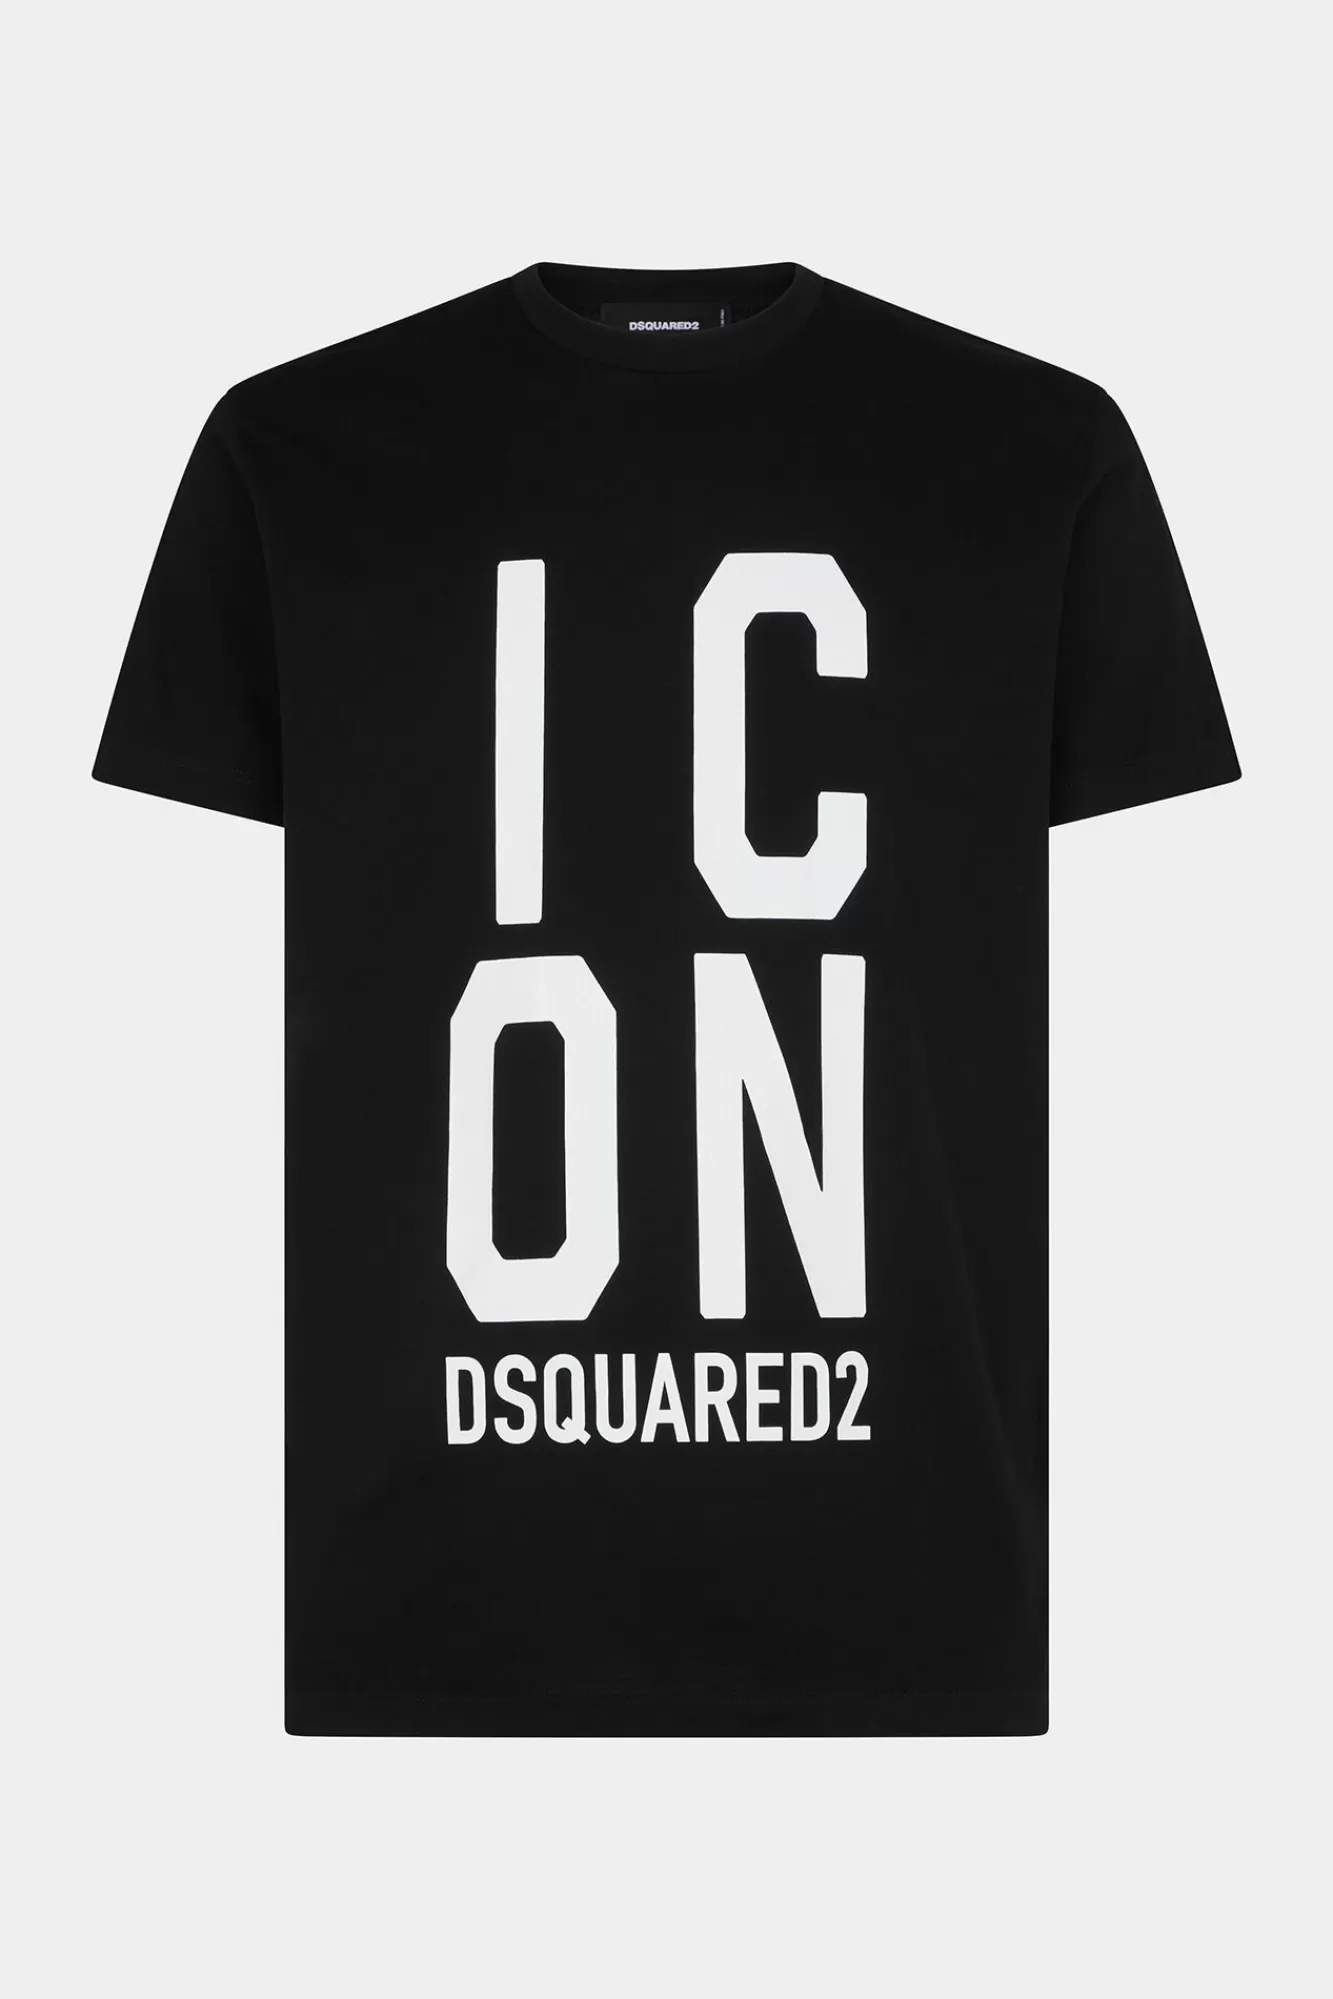 Icon Squared Cool T-Shirt<Dsquared2 Best Sale